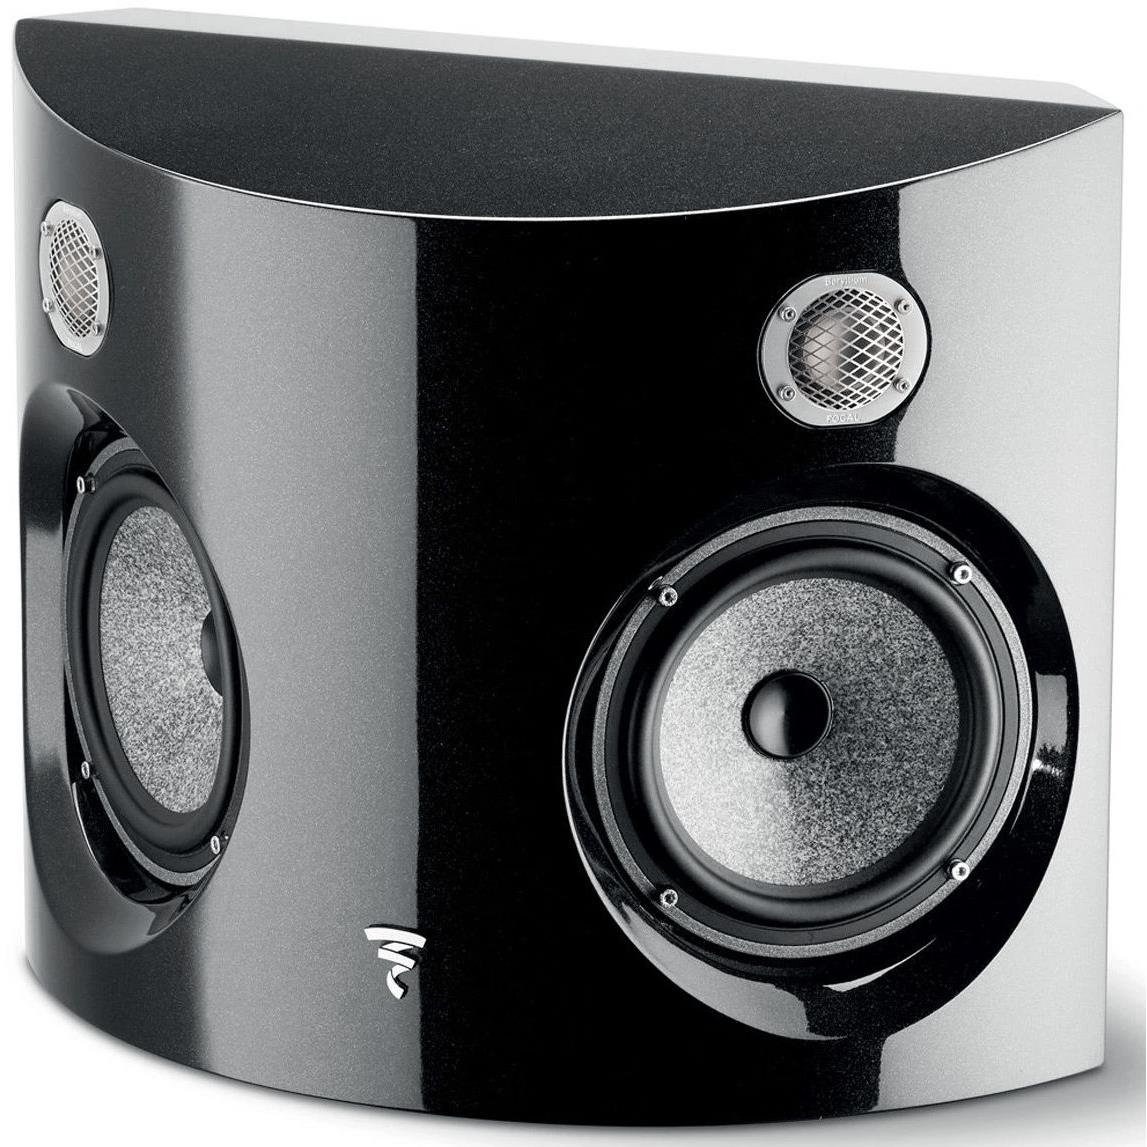 Focal Sopra Surround BE Black Lacquer 2-Way Surround Loudspeakers - JMLSURR-BE-BK - Focal-JMLSURR-BE-BK